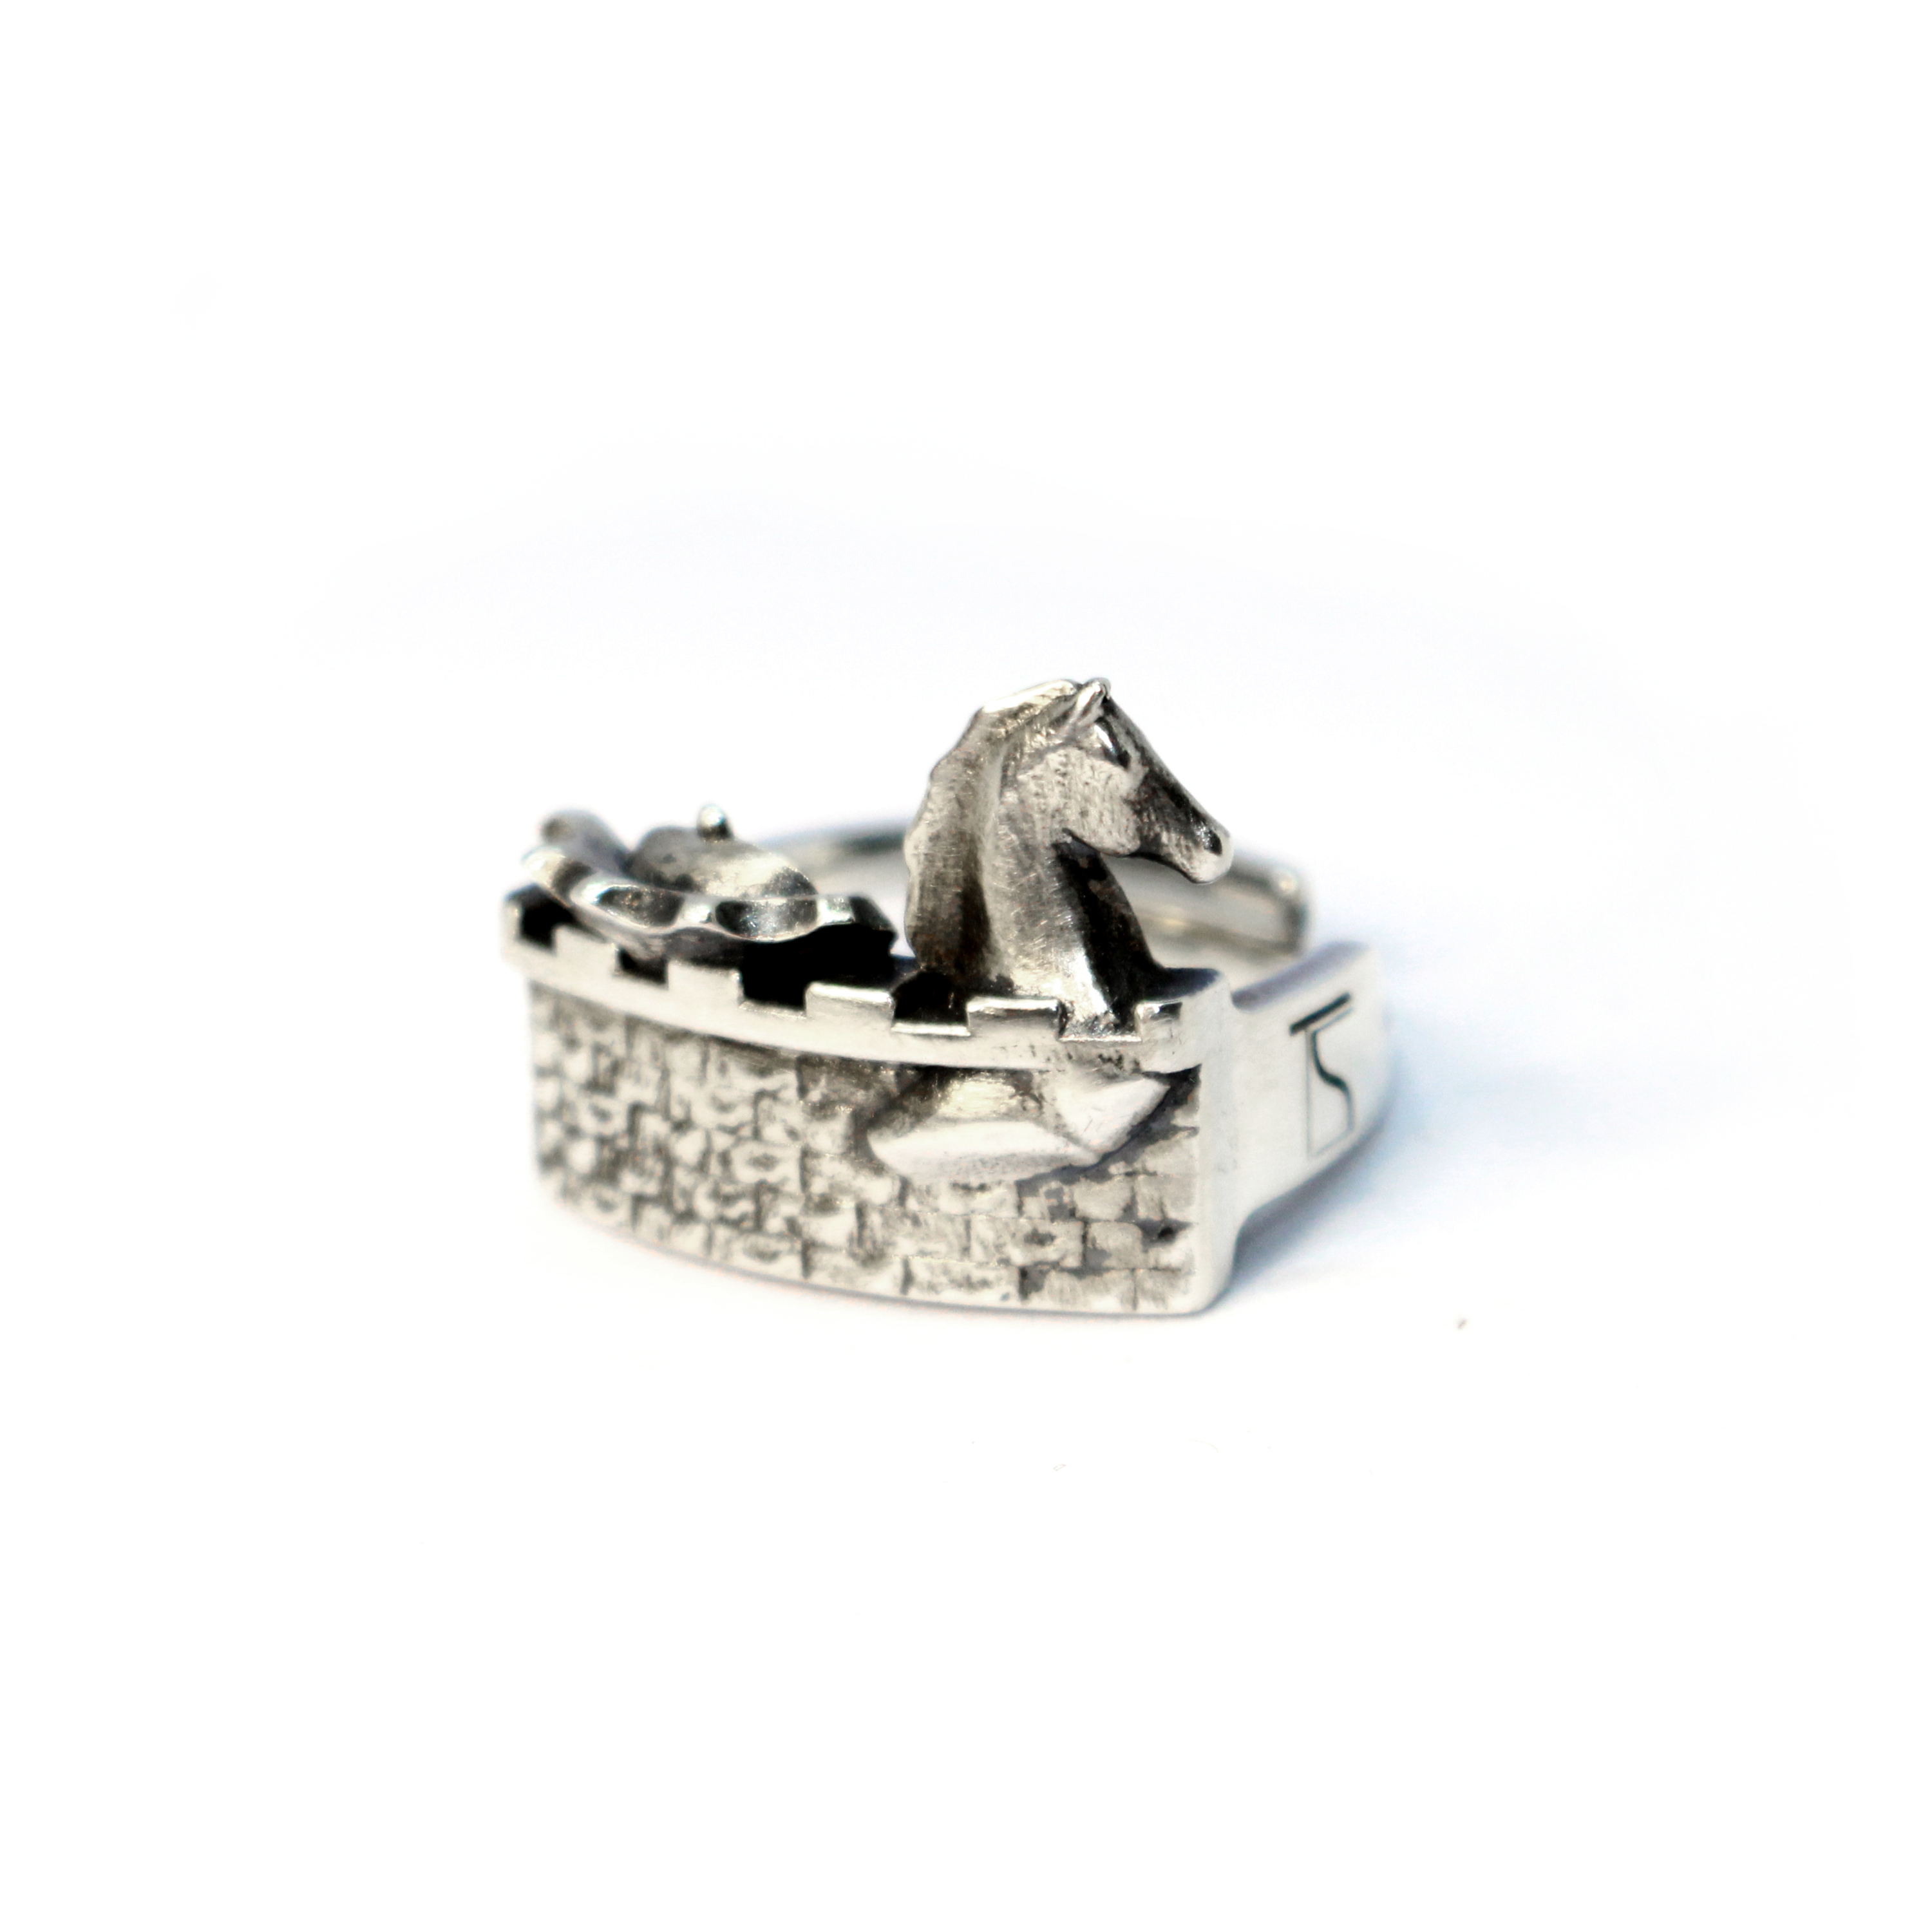 Tactonal Studio Arabian Mate Sterling Silver Ring. Close up white background